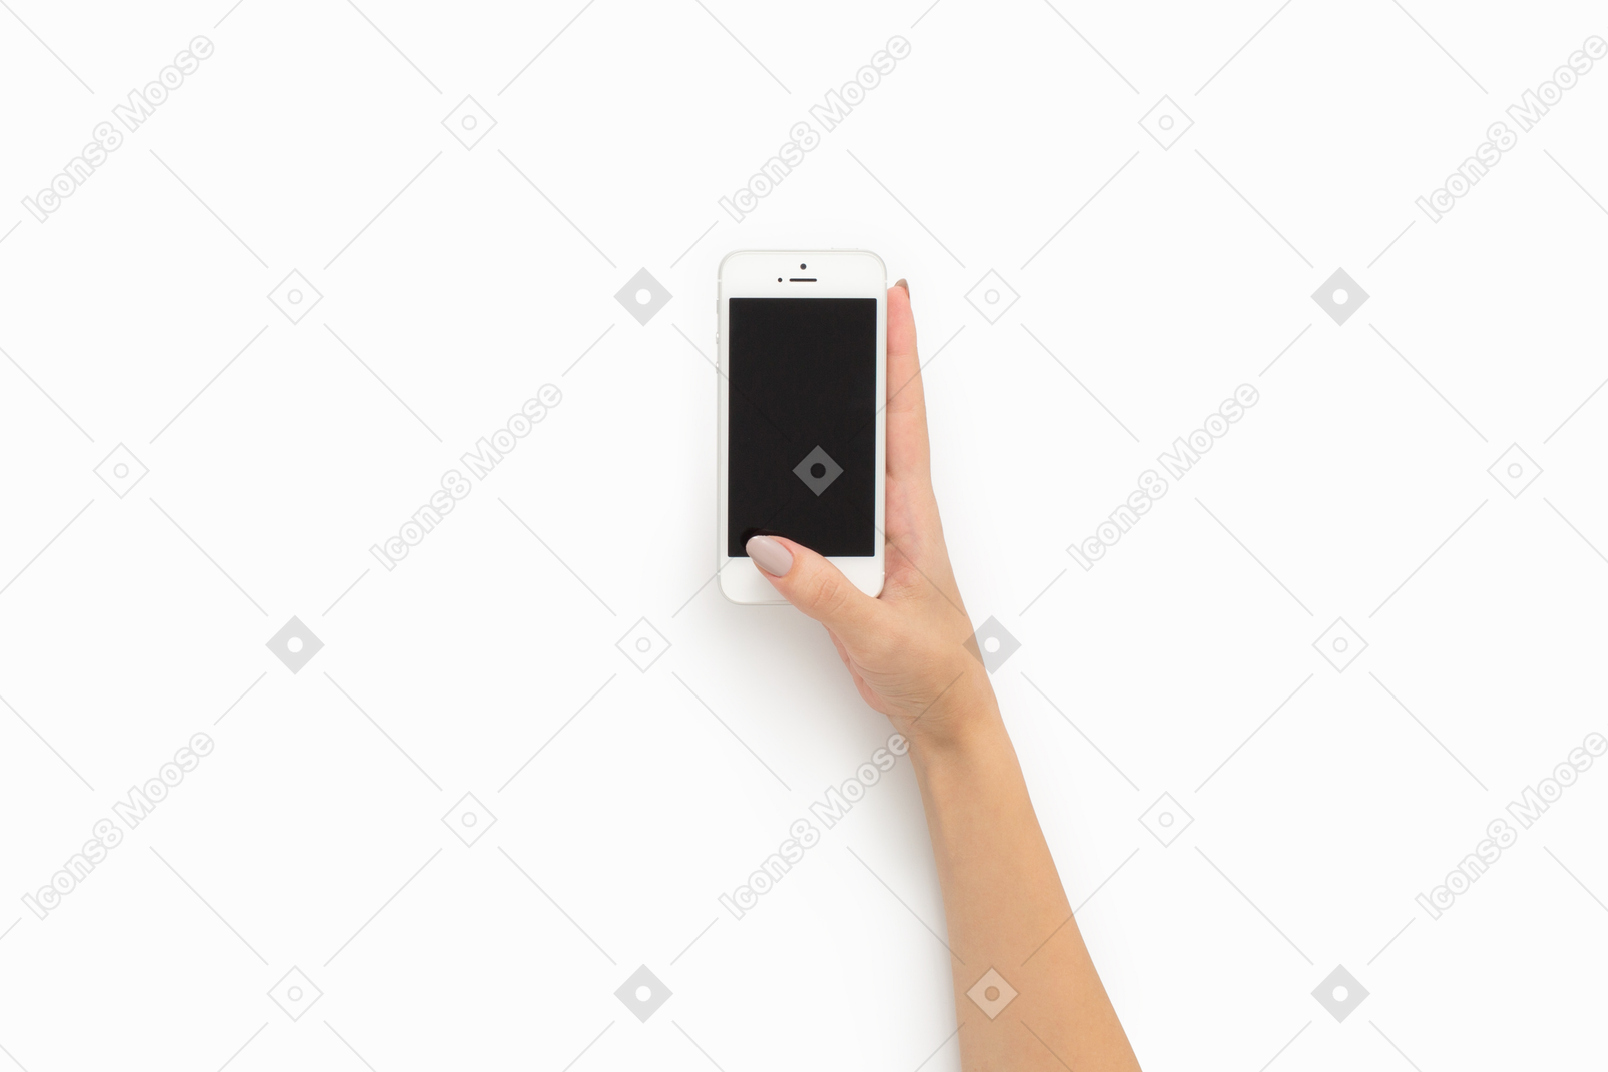 Determining the size of the smartphone